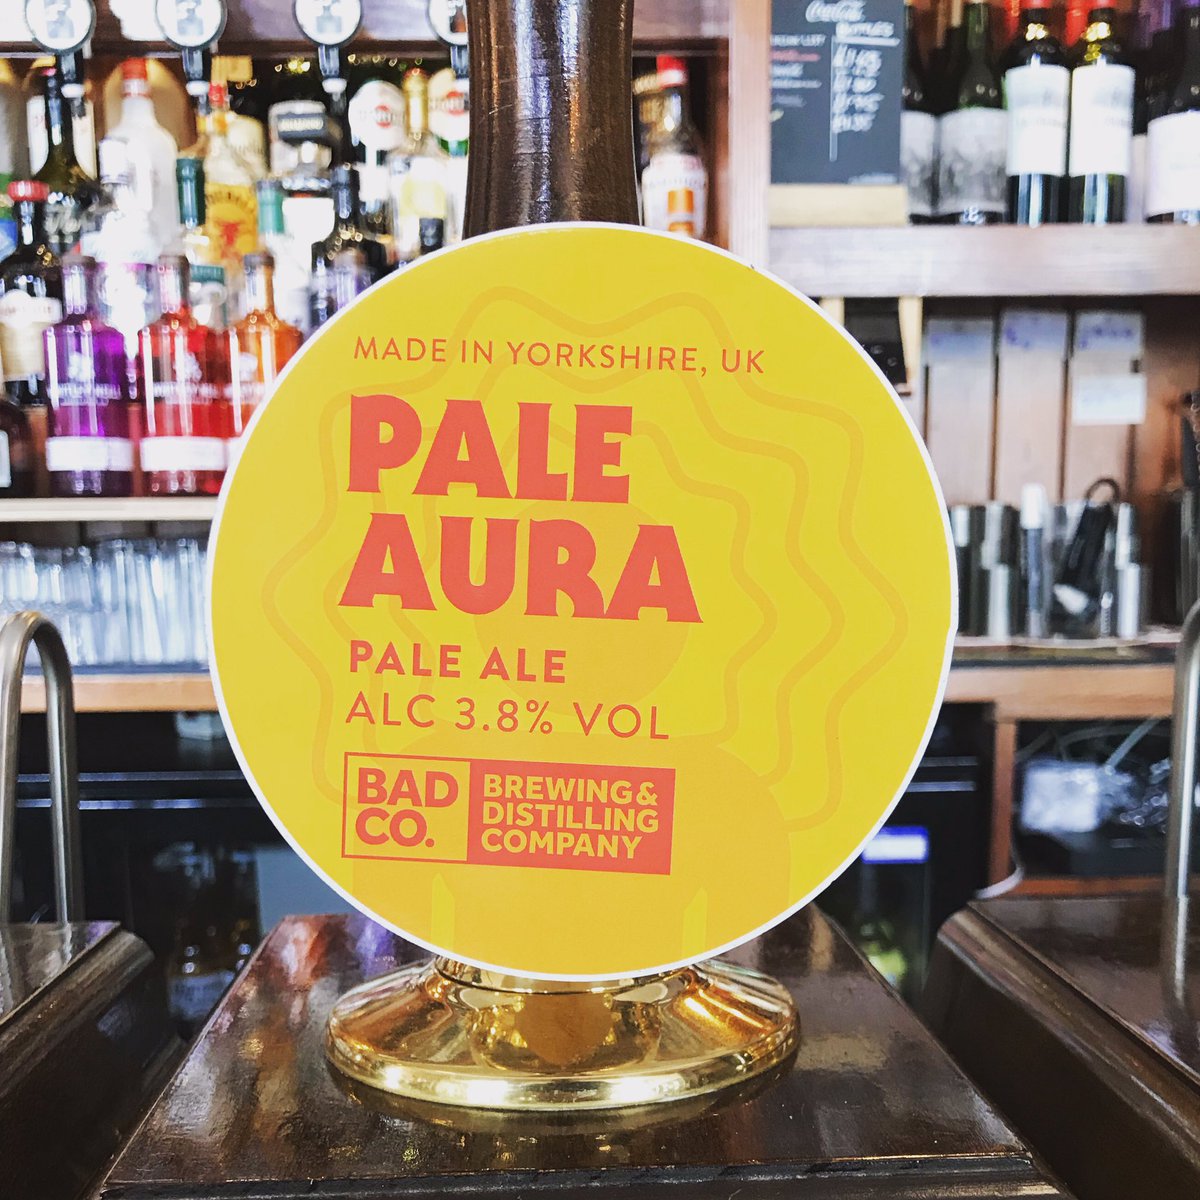 Fresh on this morning! Described by the brewers as dry-hopped and fruity. Kicks of mango, tangerine, grapefruit and pineapple.
Described by us as beautiful! @WeAreBadCo